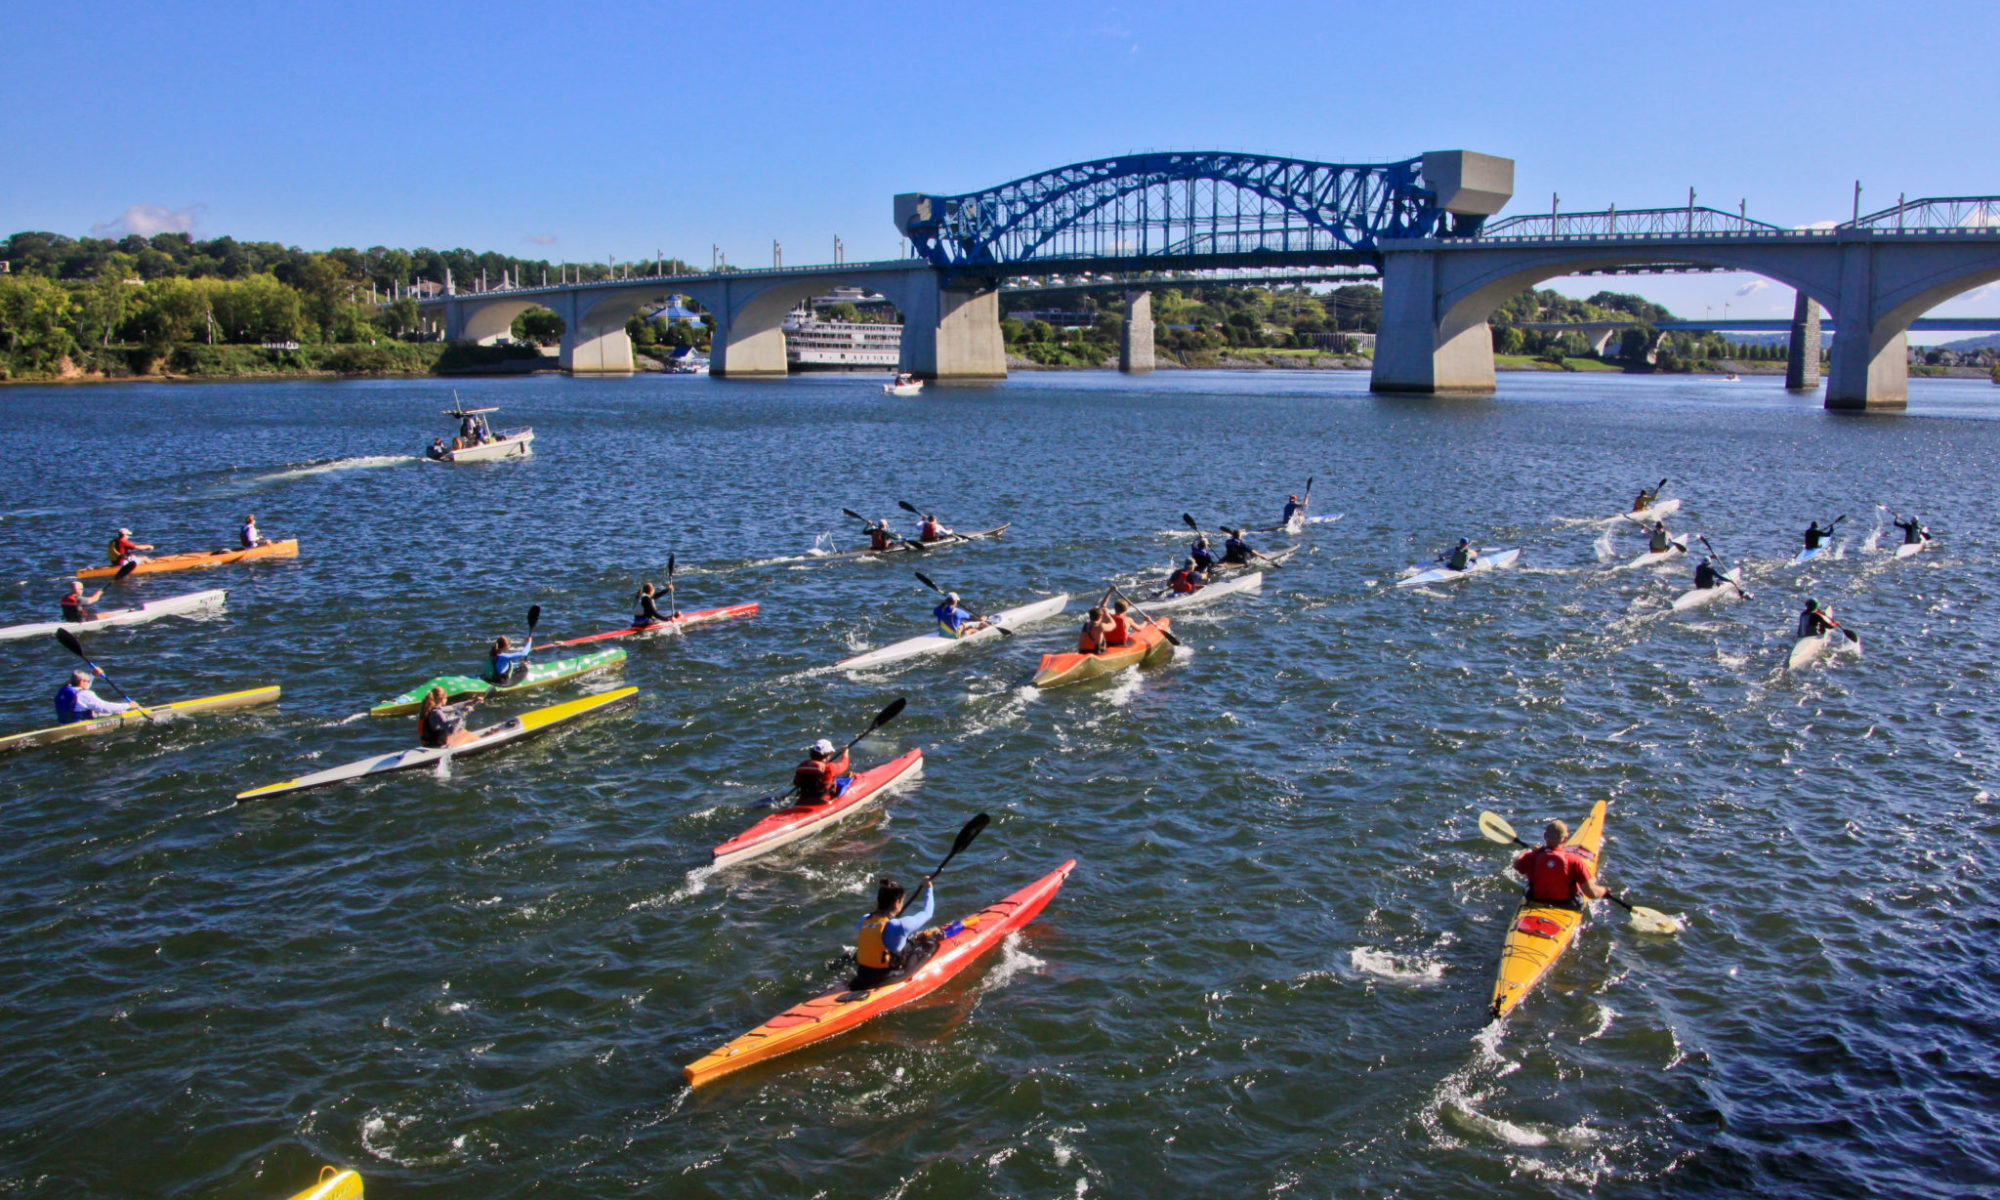 A large group of student kayak on the Tennessee River while a spanning bridge sets the background